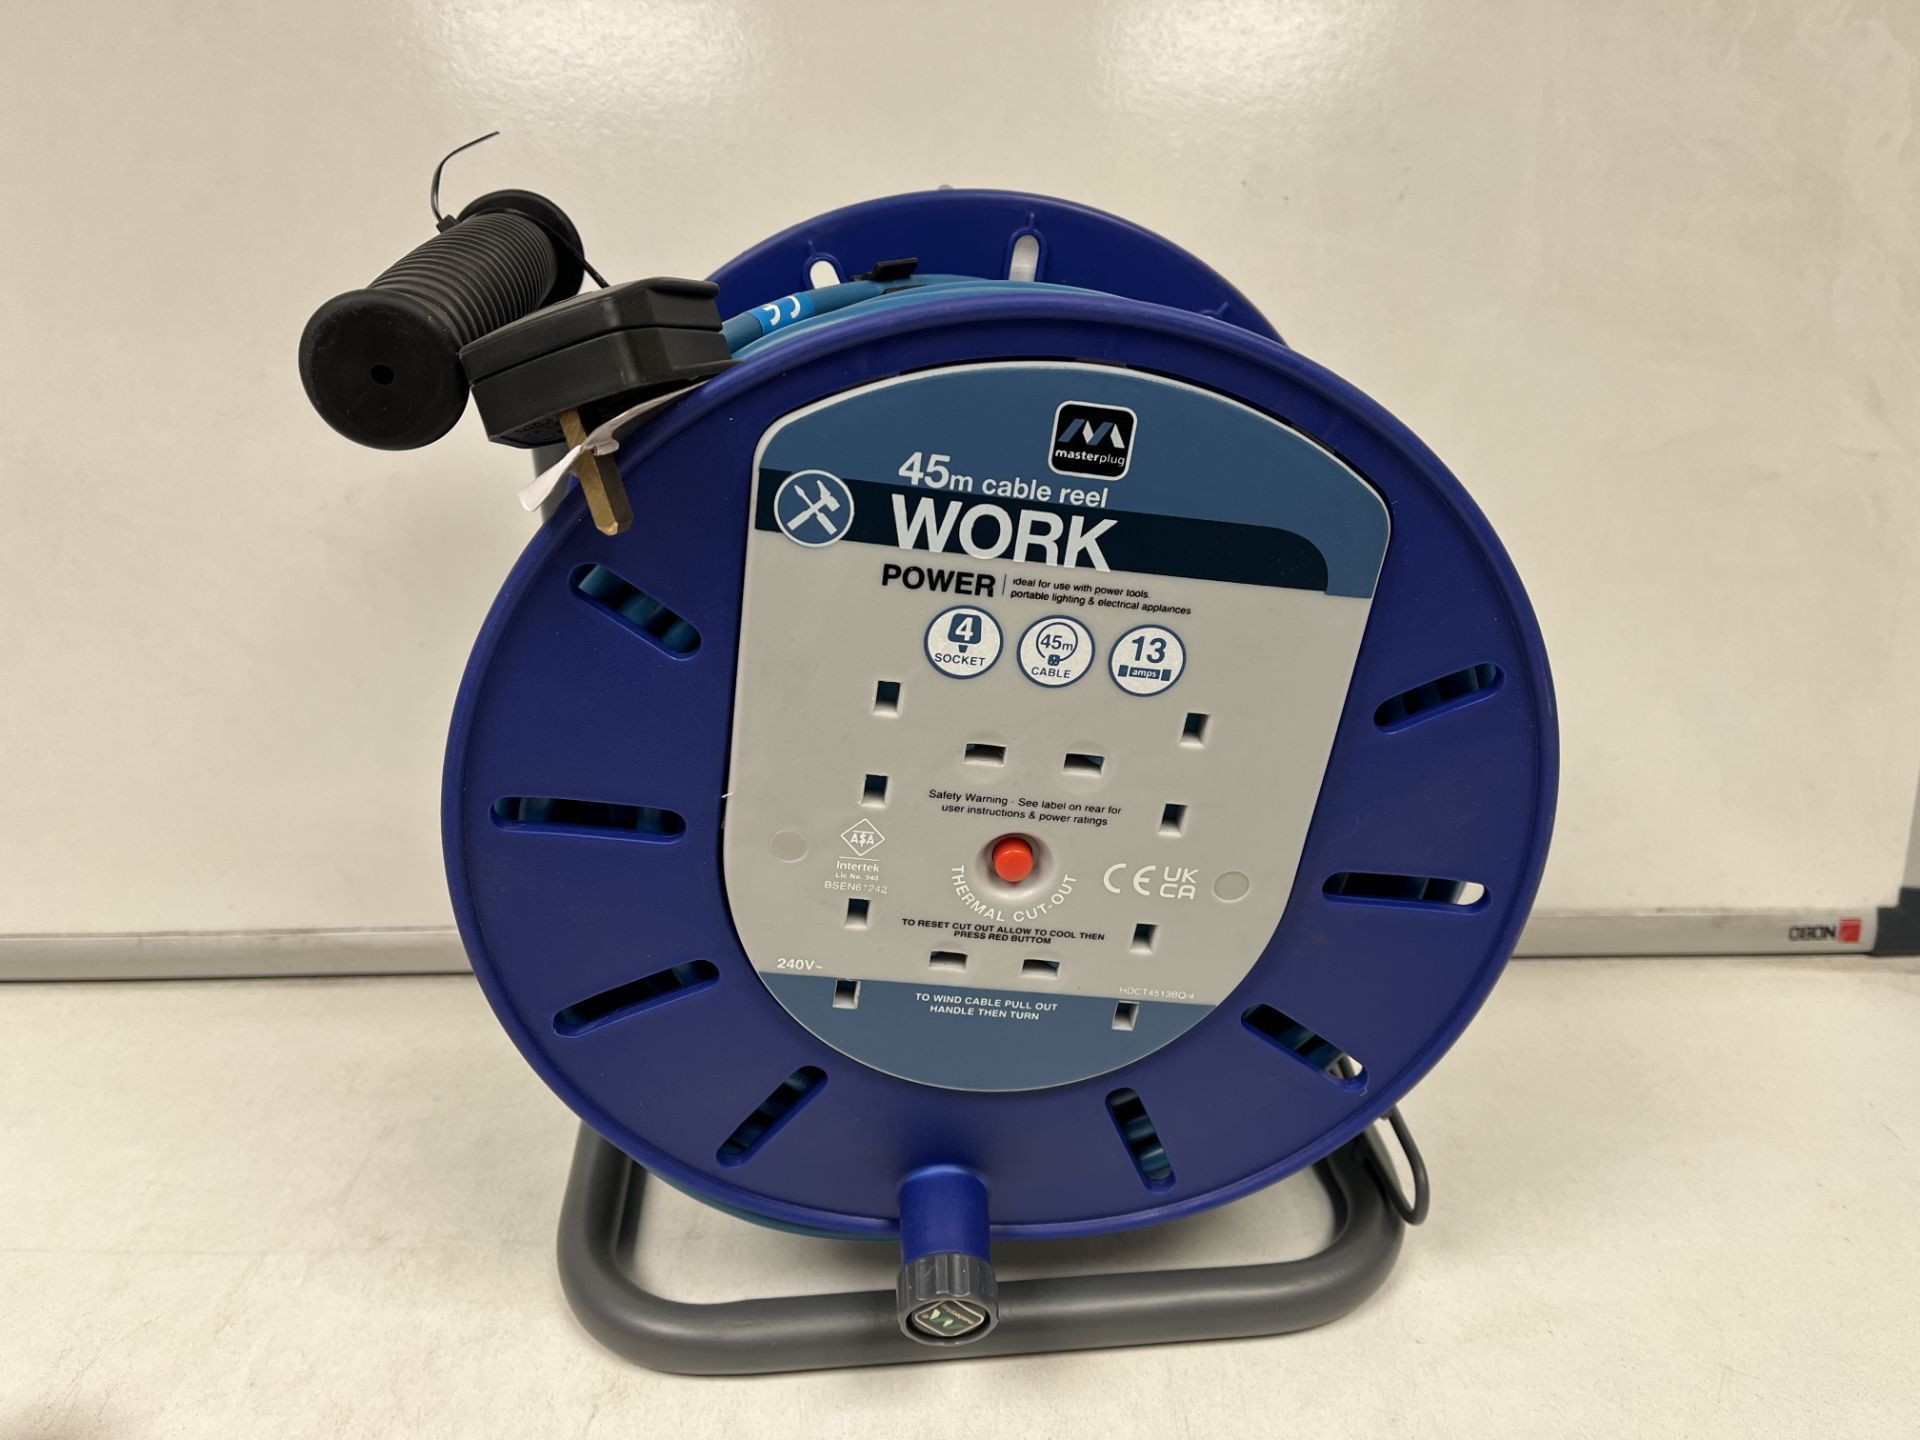 TRADE LOT 10 X NEW BOXED MASTERPLUG 45M CABLE REEL. WORK POWER. 4 SOCKET. 45M CABLE. 13 AMPS WITH